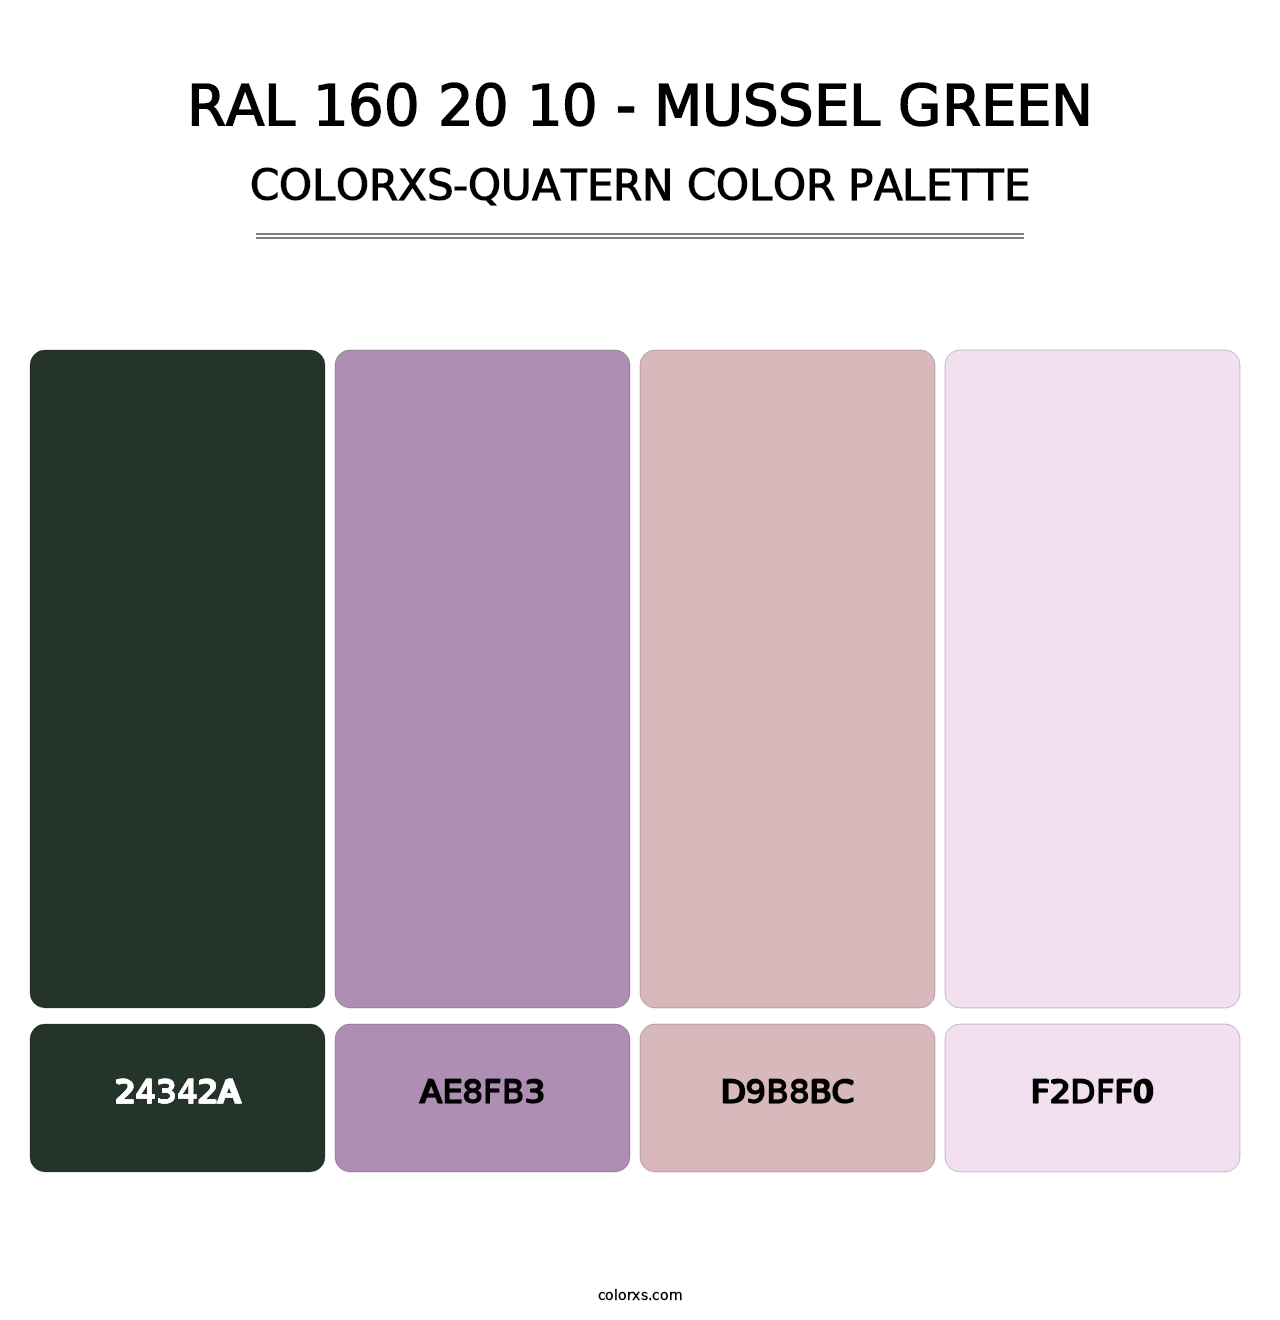 RAL 160 20 10 - Mussel Green - Colorxs Quatern Palette